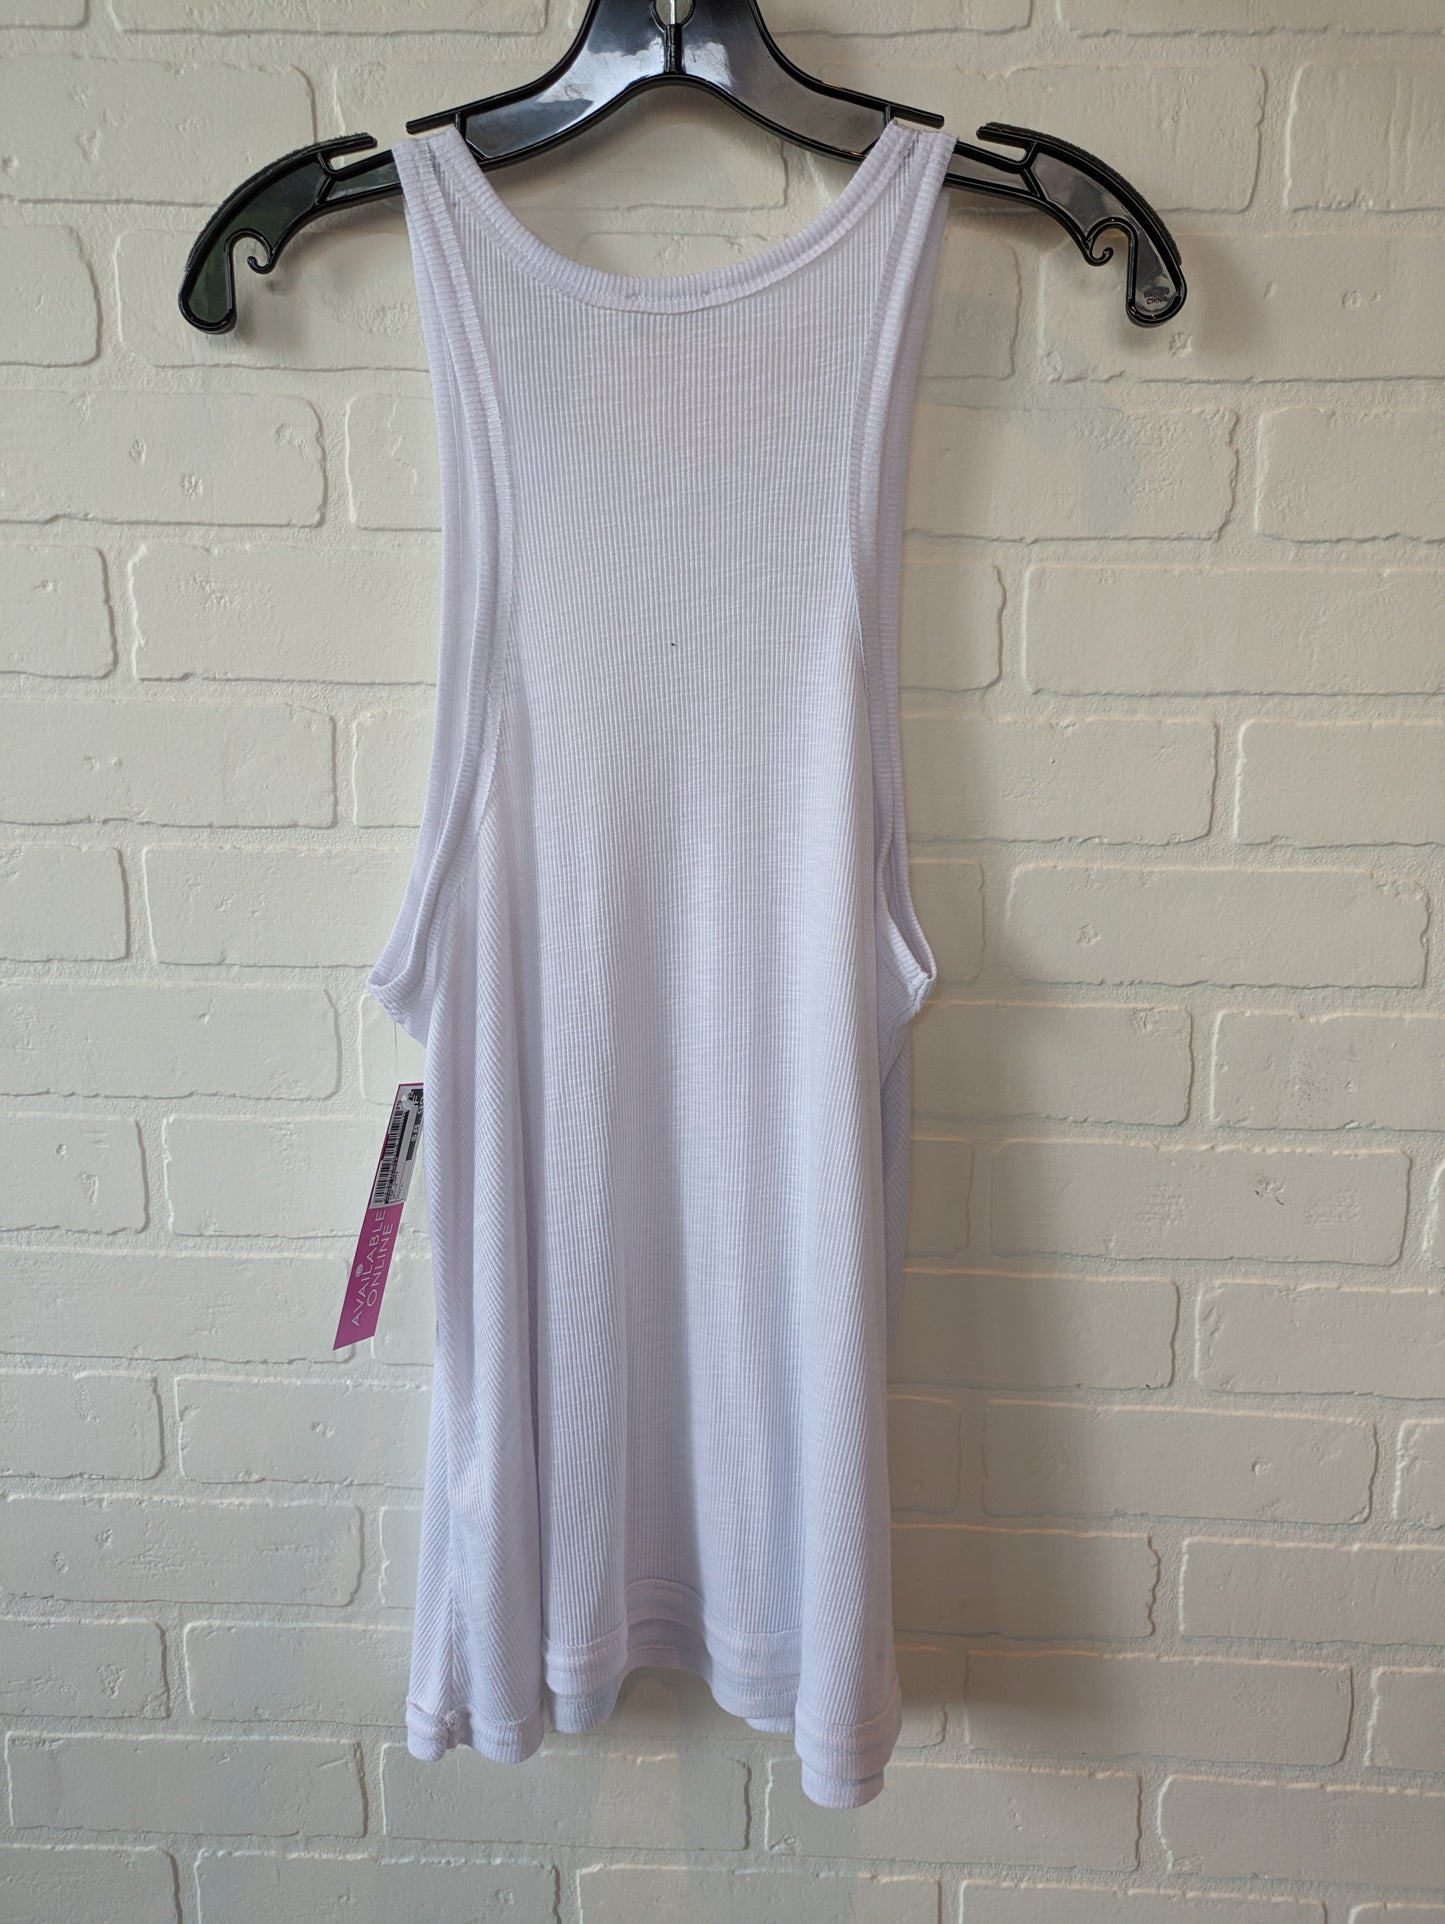 White Top Cami Free People, Size L